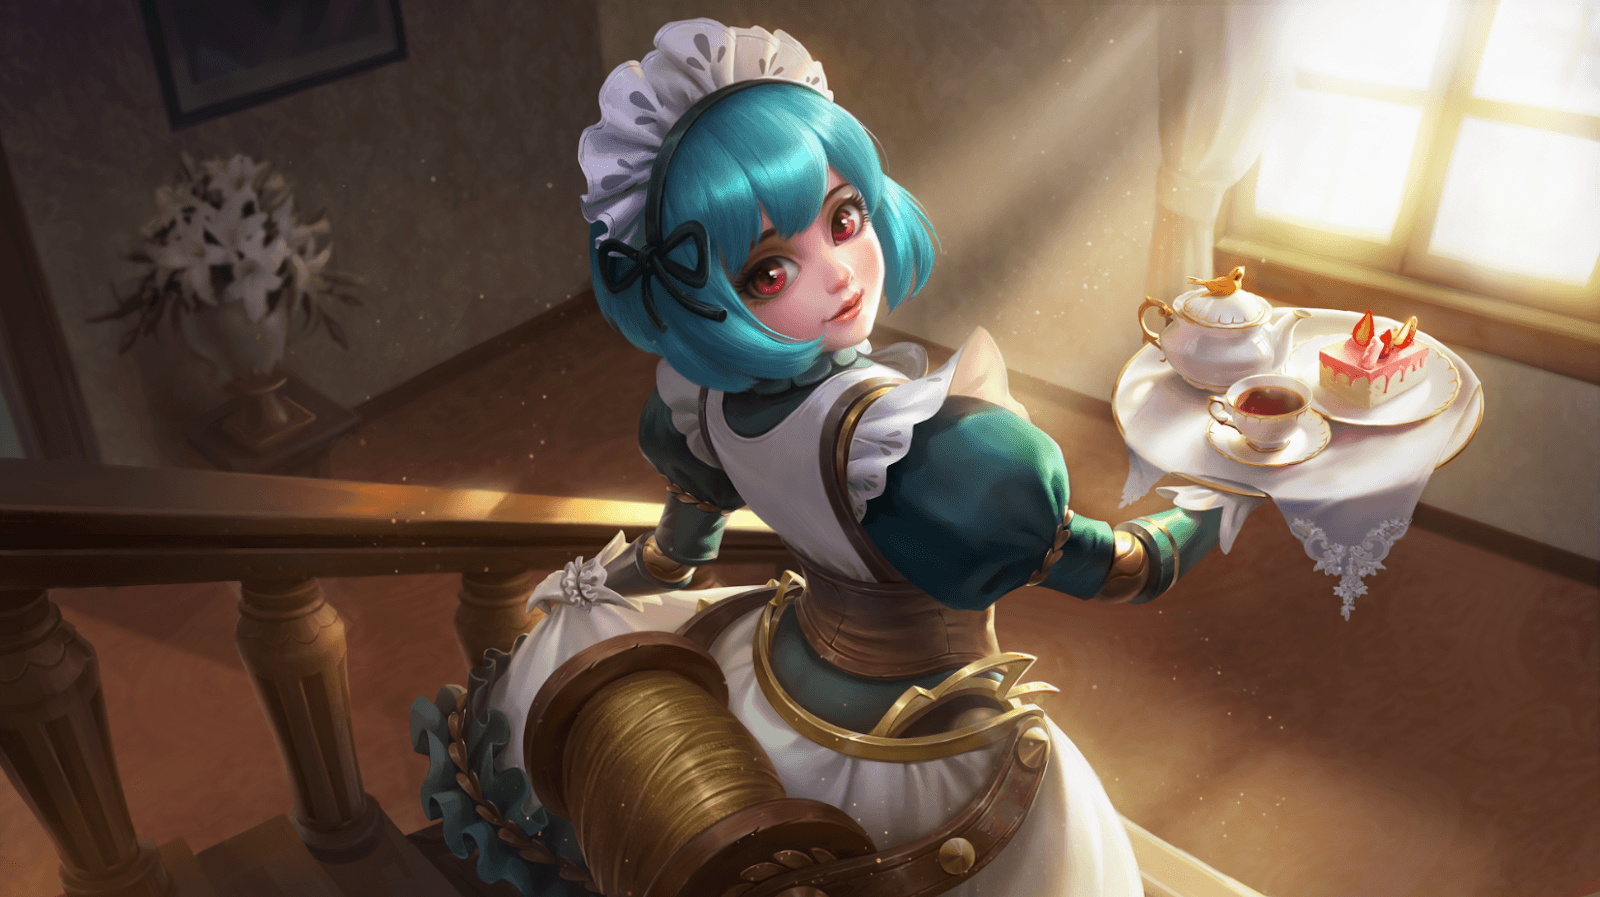 Read Here For Mobile Legend Wallpaper & Background Download